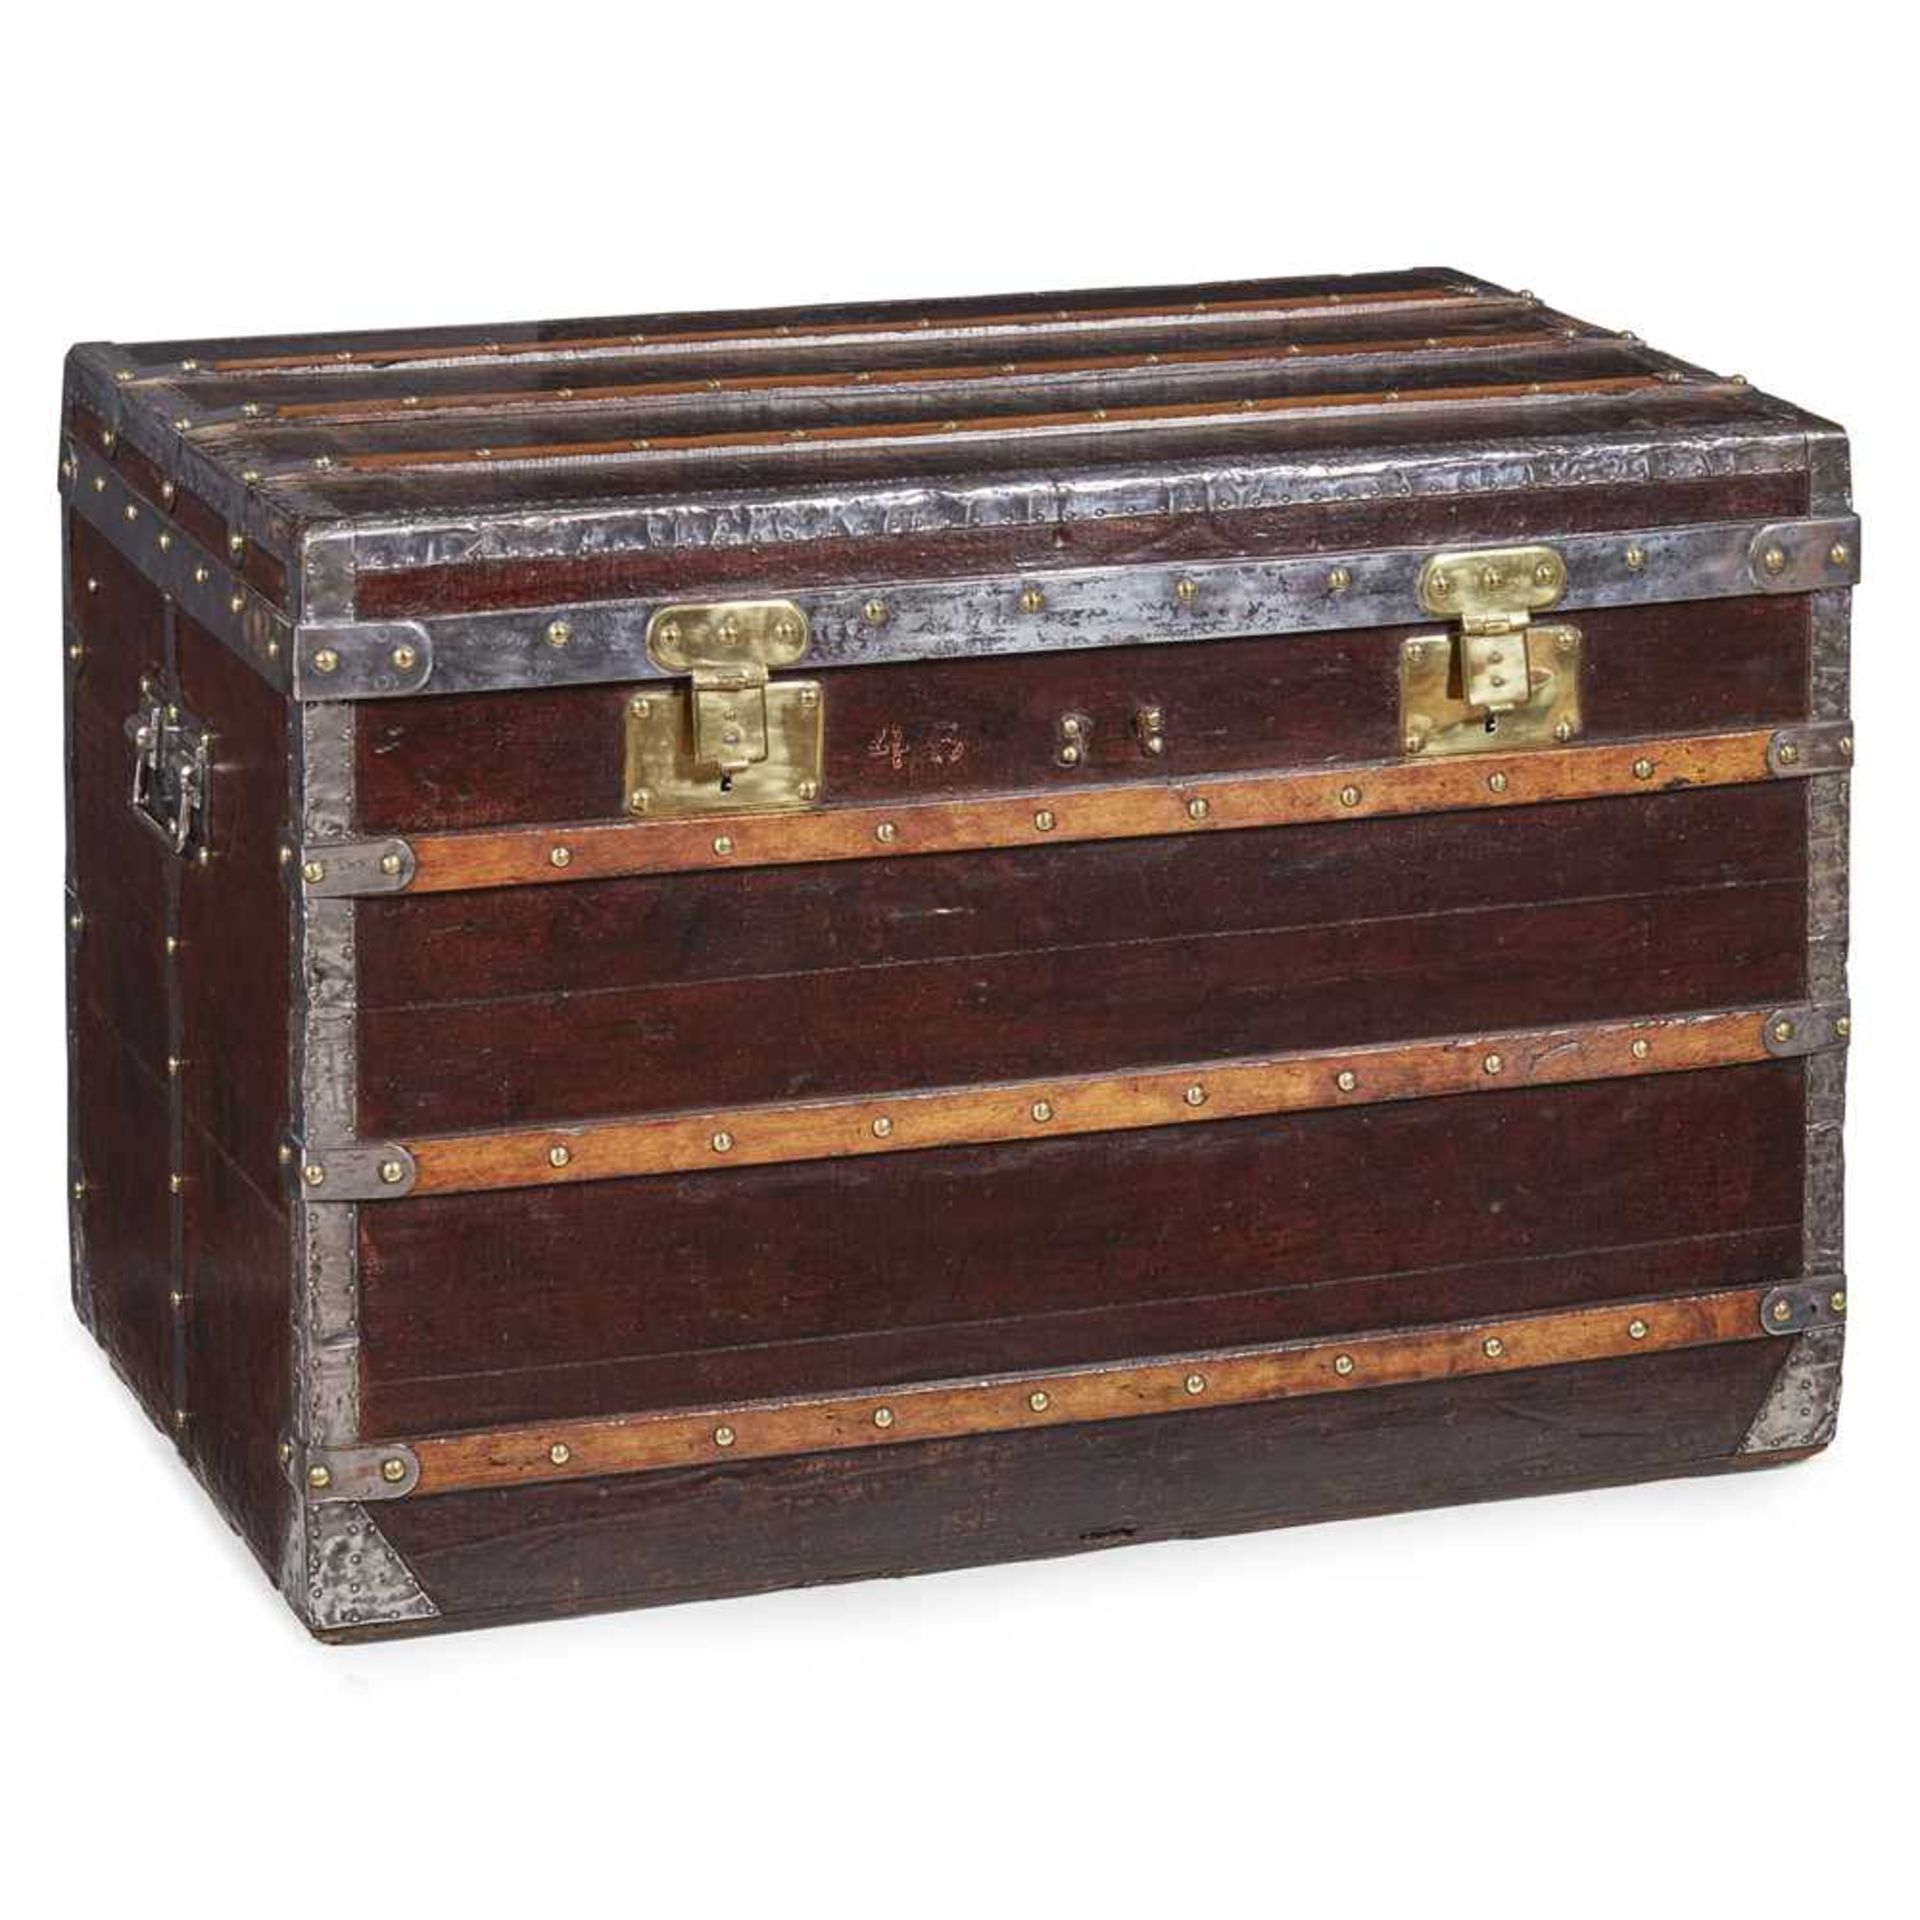 LOUIS VUITTON CANVAS AND ALUMINIUM COURIER TRUNK LATE 19TH CENTURY